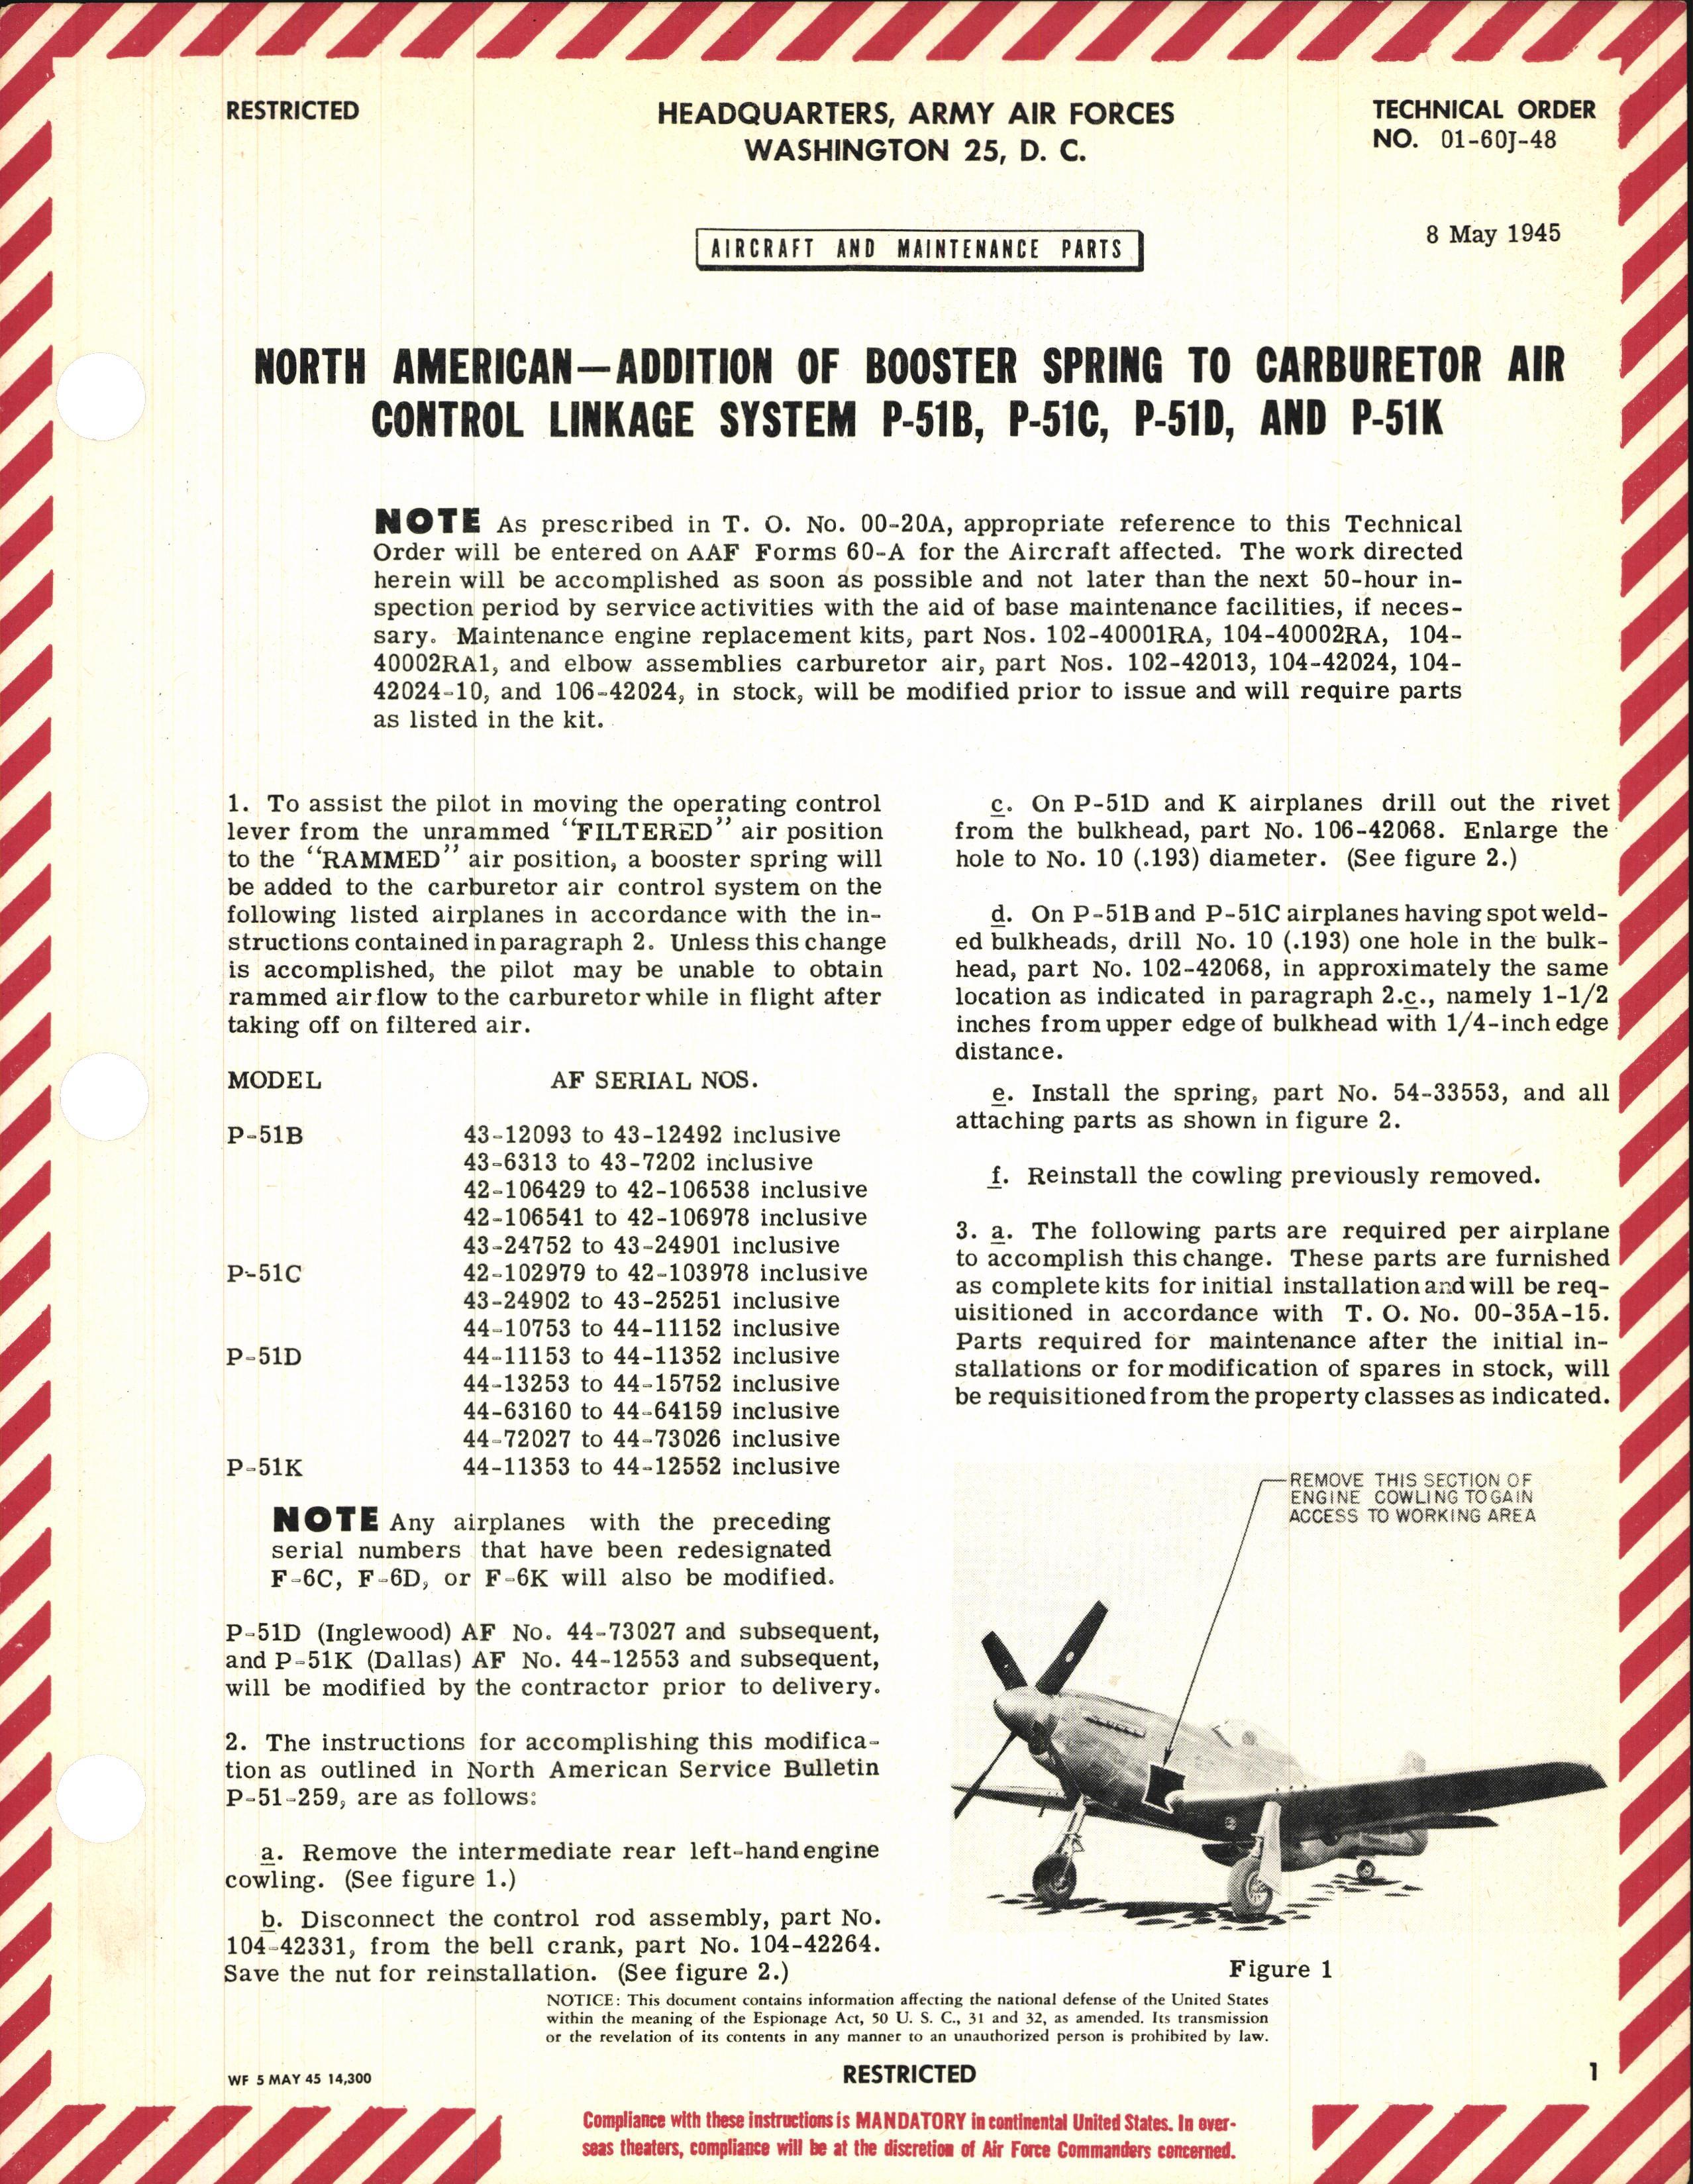 Sample page 1 from AirCorps Library document: Addition of Booster Spring to Carburetor Air Control Linkage System